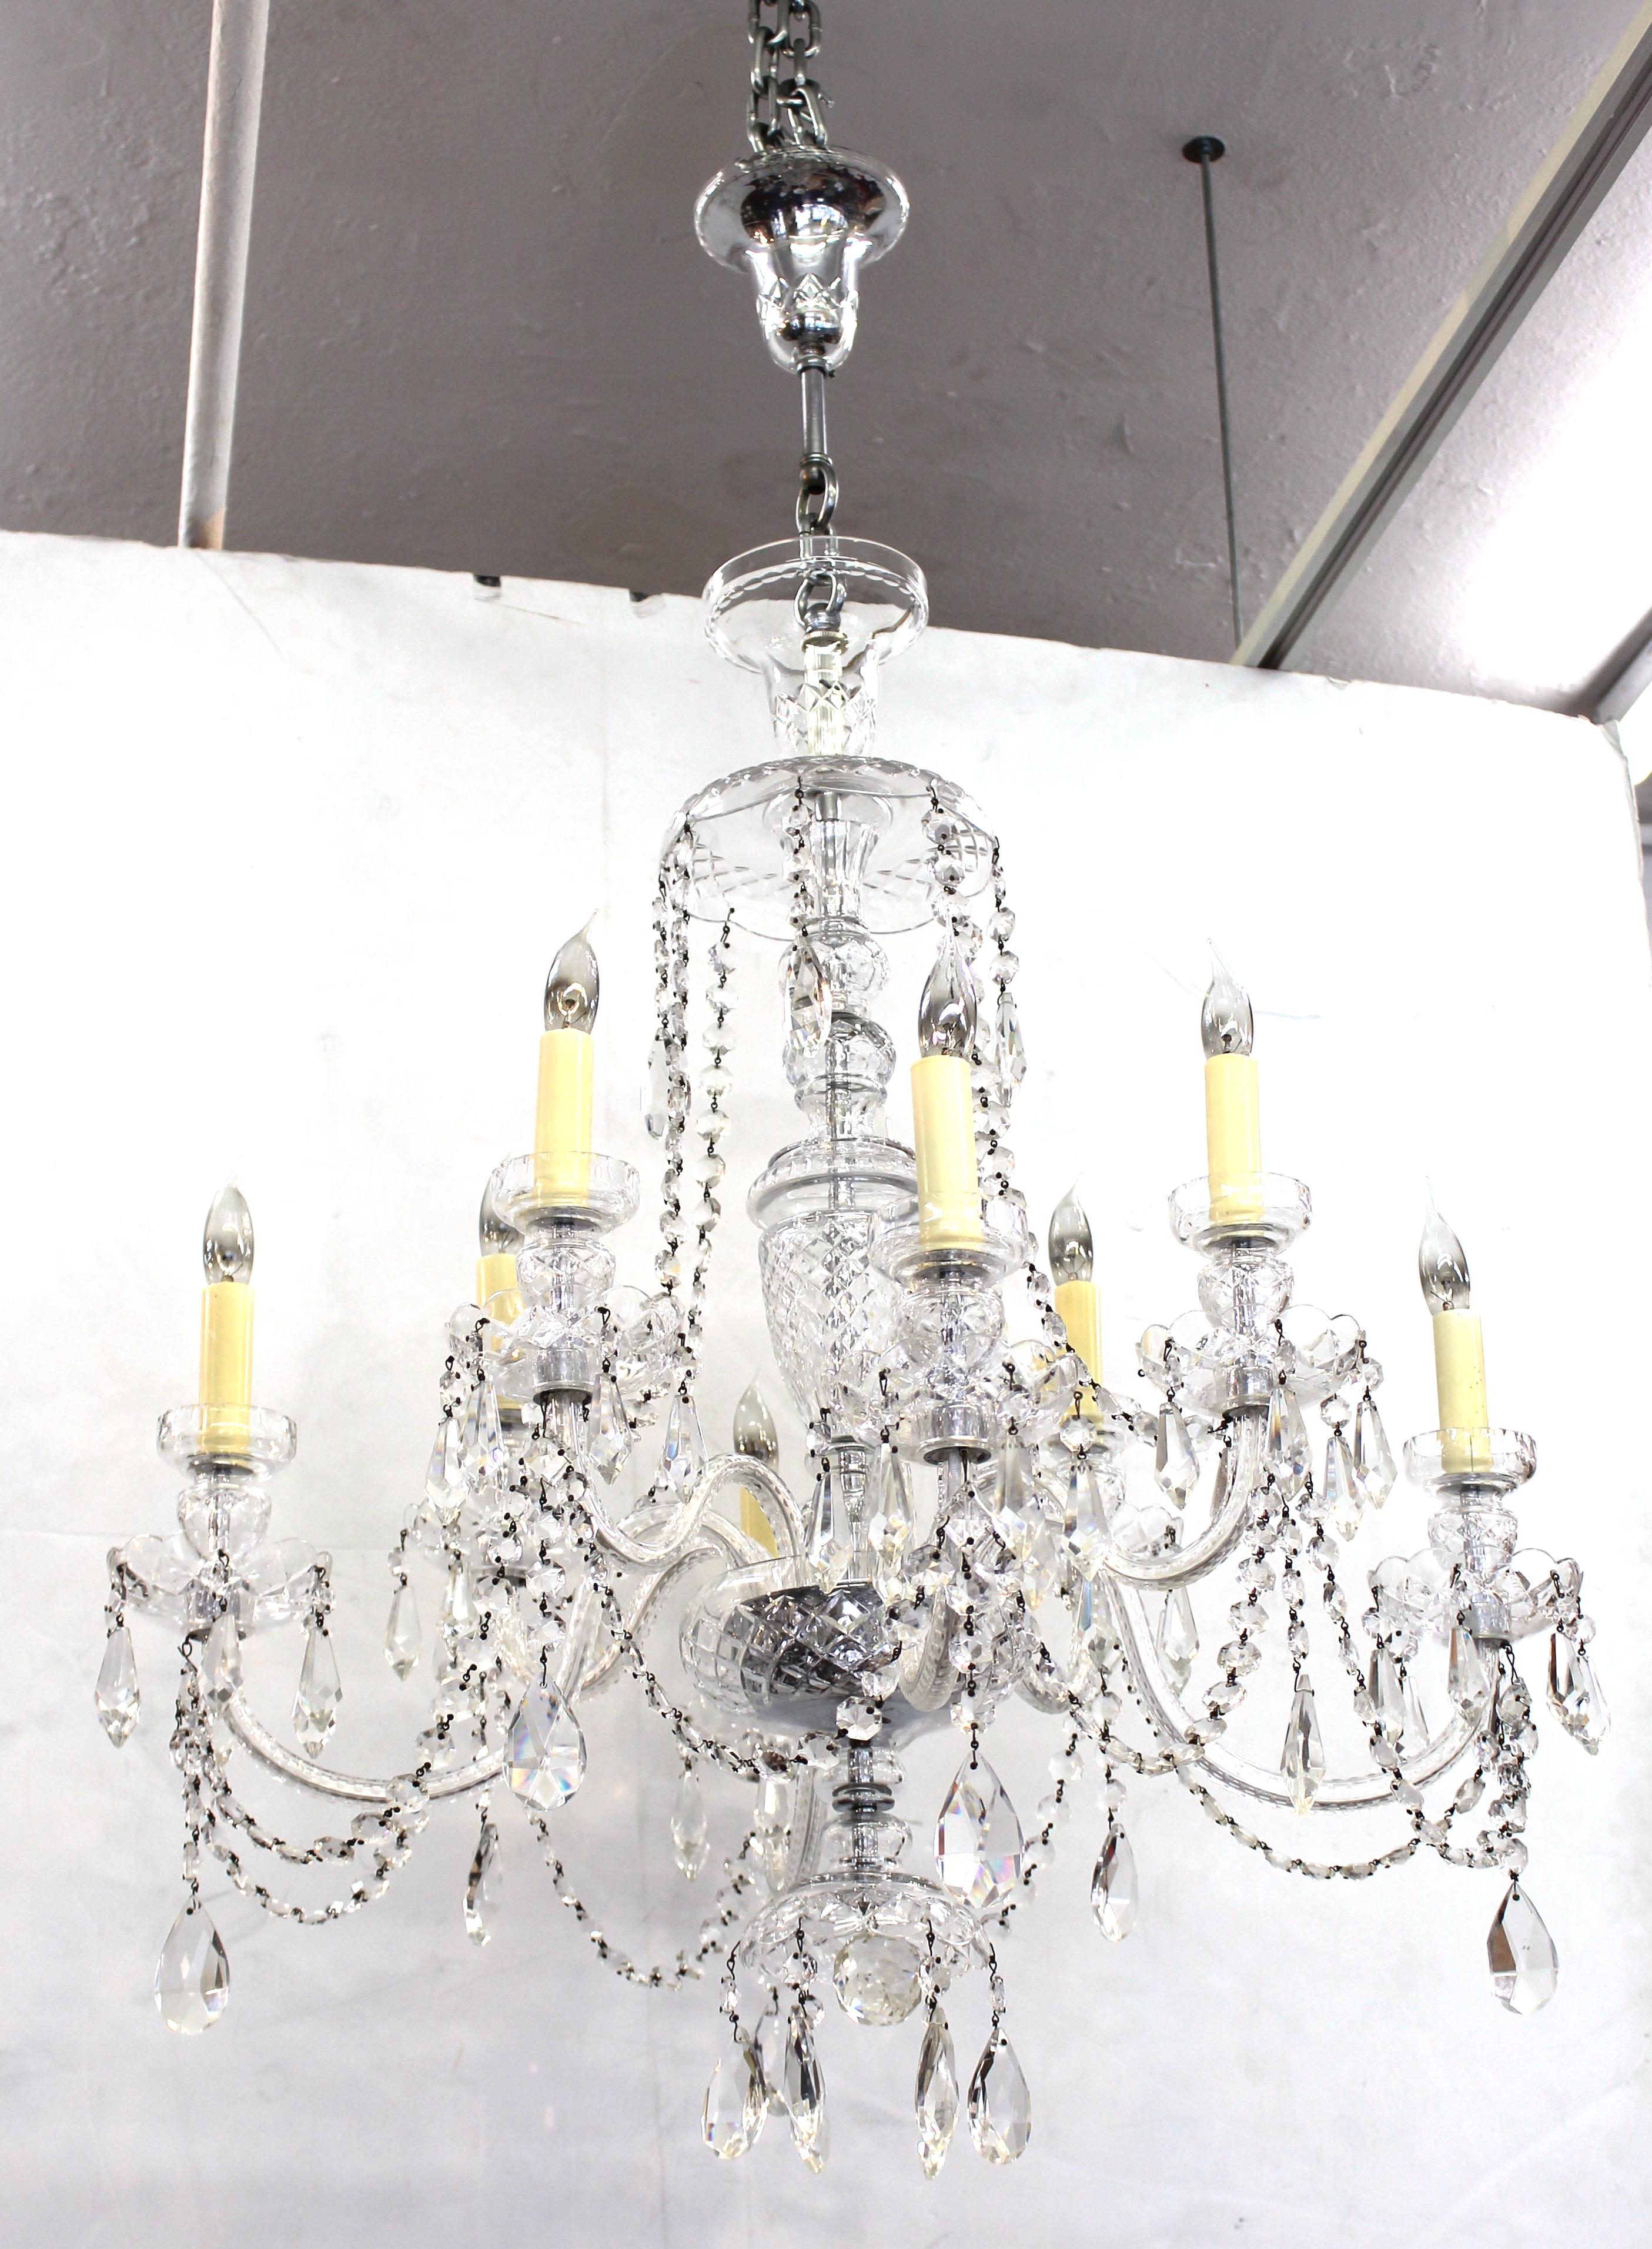 Hollywood Regency midcentury crystal chandelier in Waterford style. The piece has age-appropriate wear and is in overall great vintage condition.